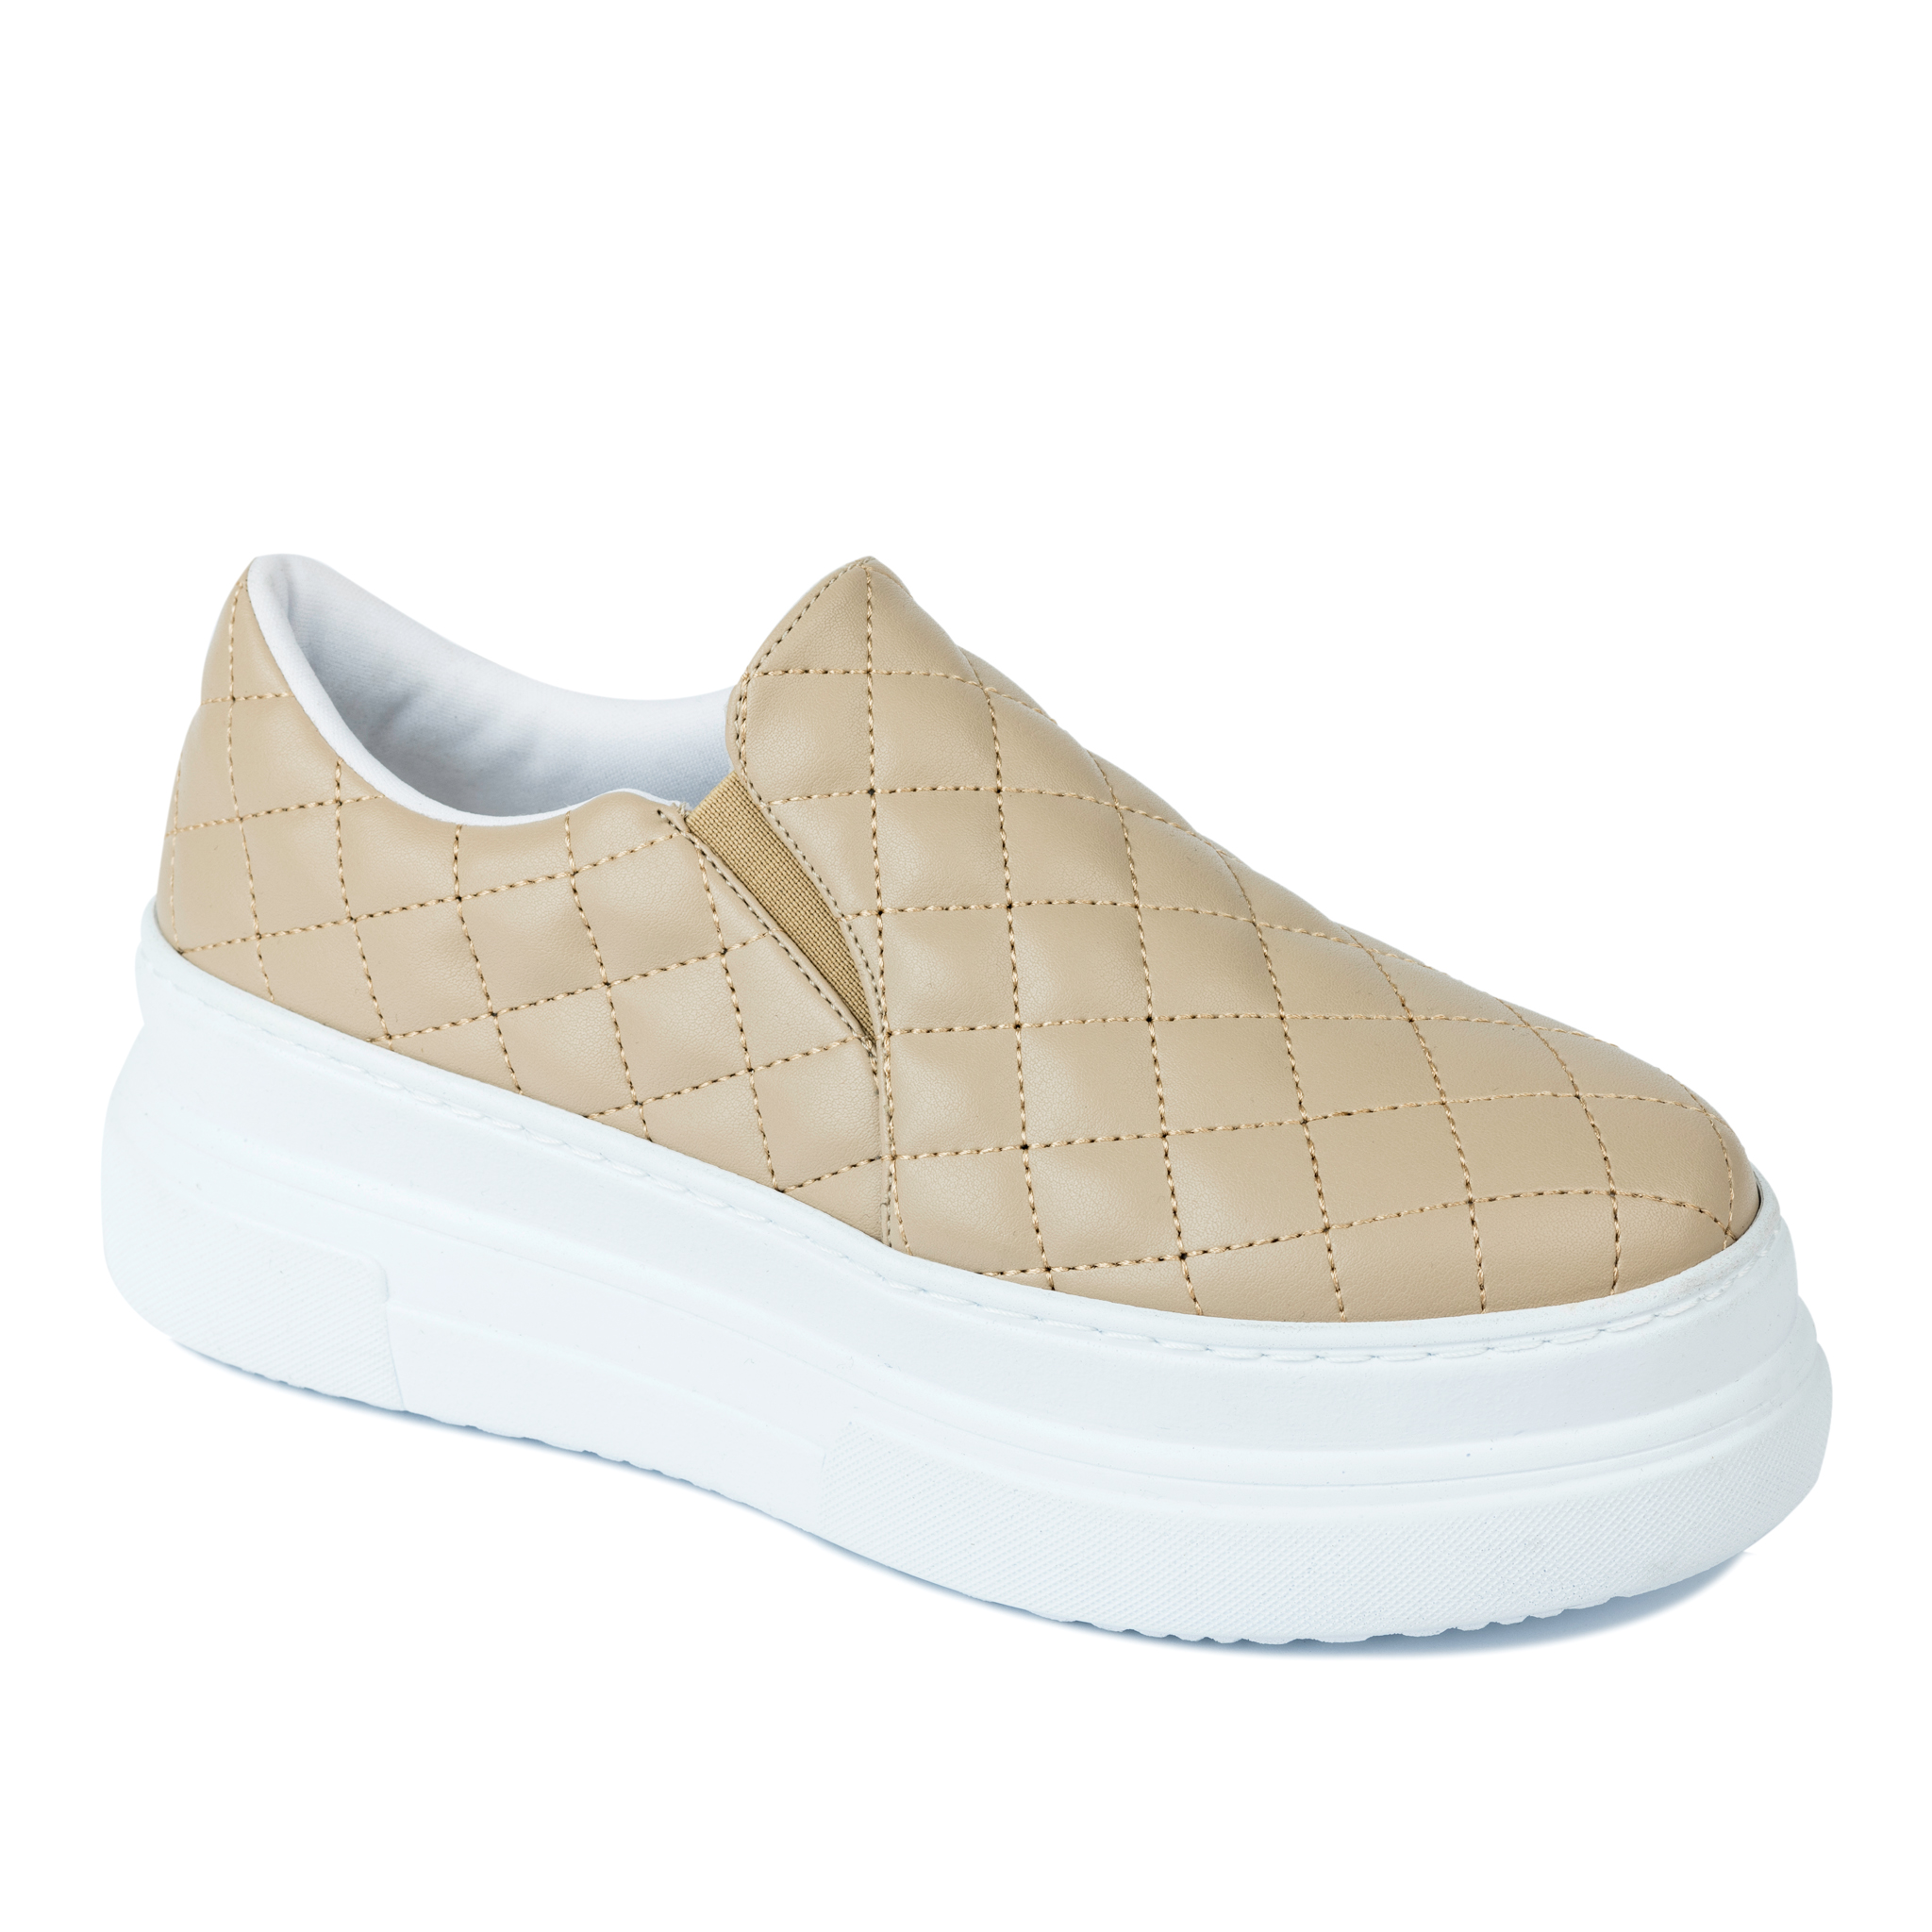 SAW PULL ON HIGH SOLE SNEAKERS - BEIGE